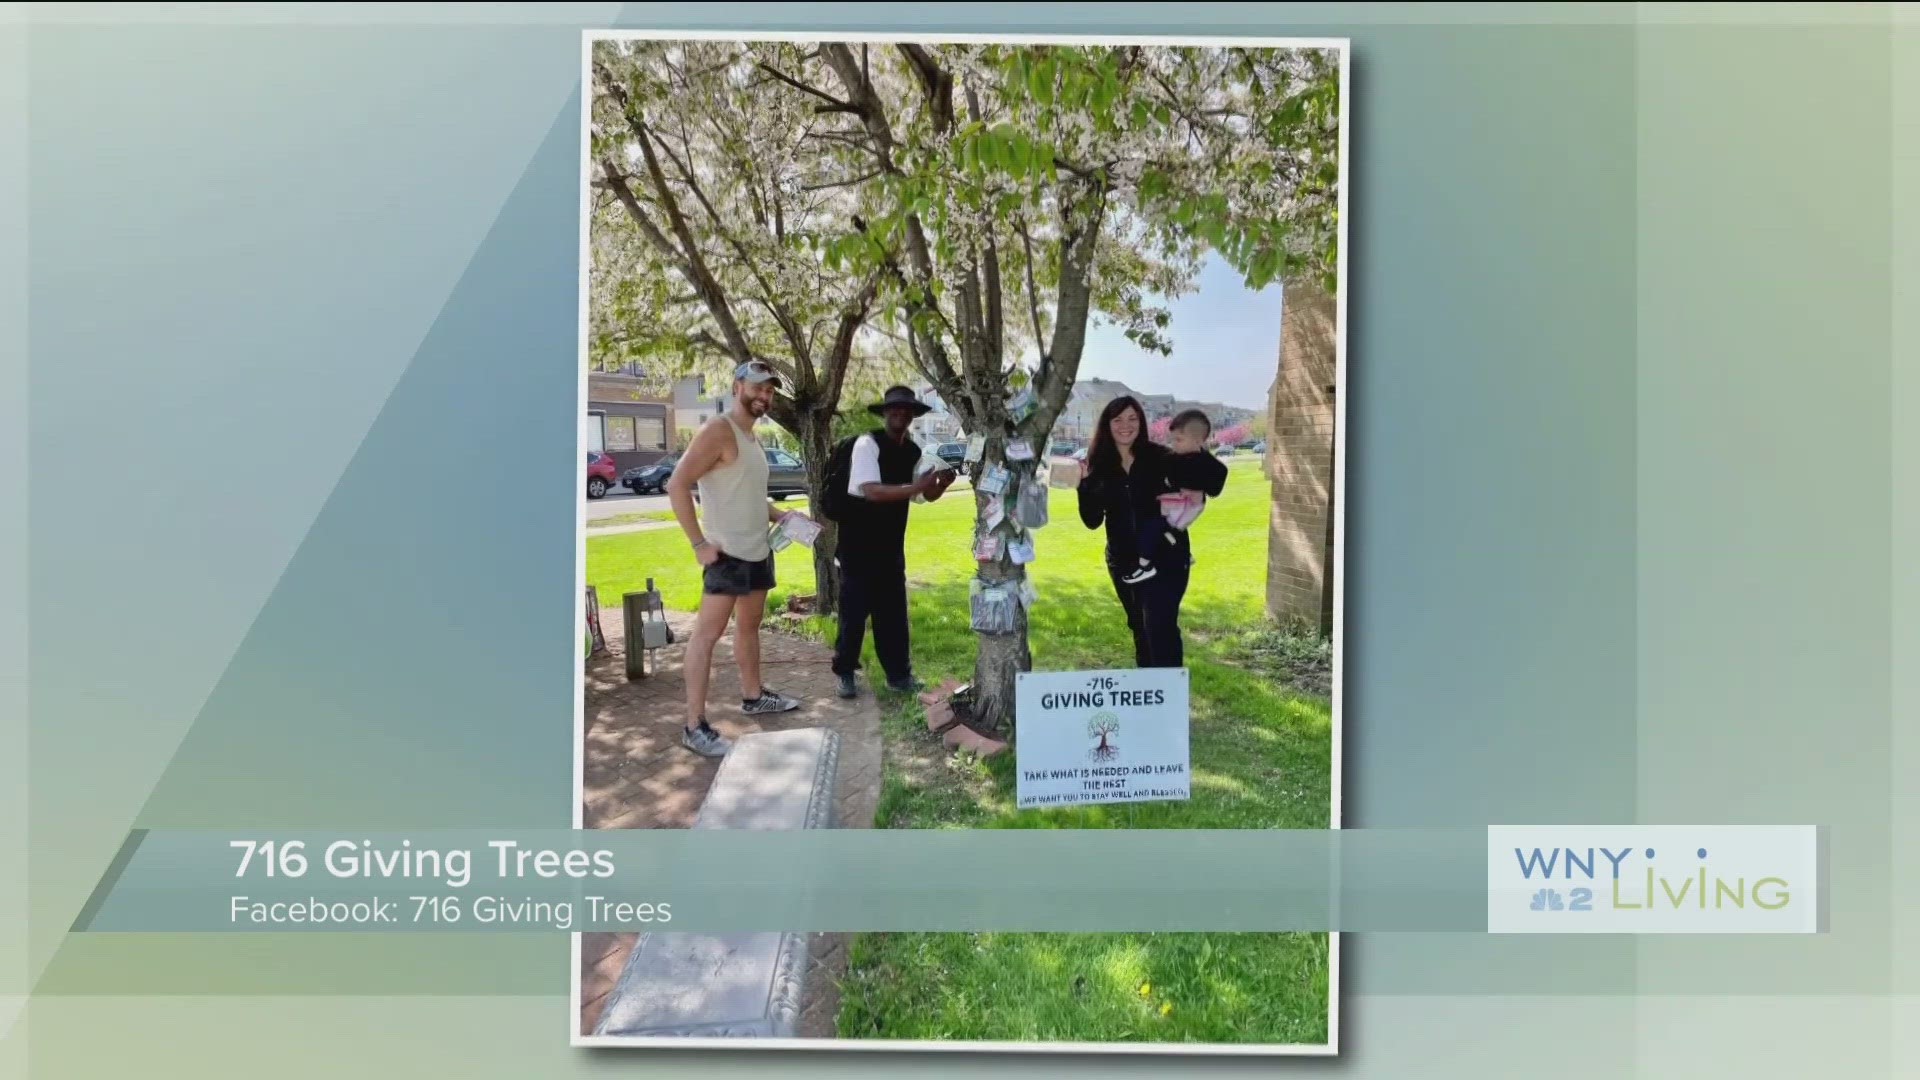 May 20th - WNY Living - WNY Giving - M&T Bank -716 Giving Trees (THIS VIDEO IS SPONSORED BY M&T BANK 716 GIVING TREES)